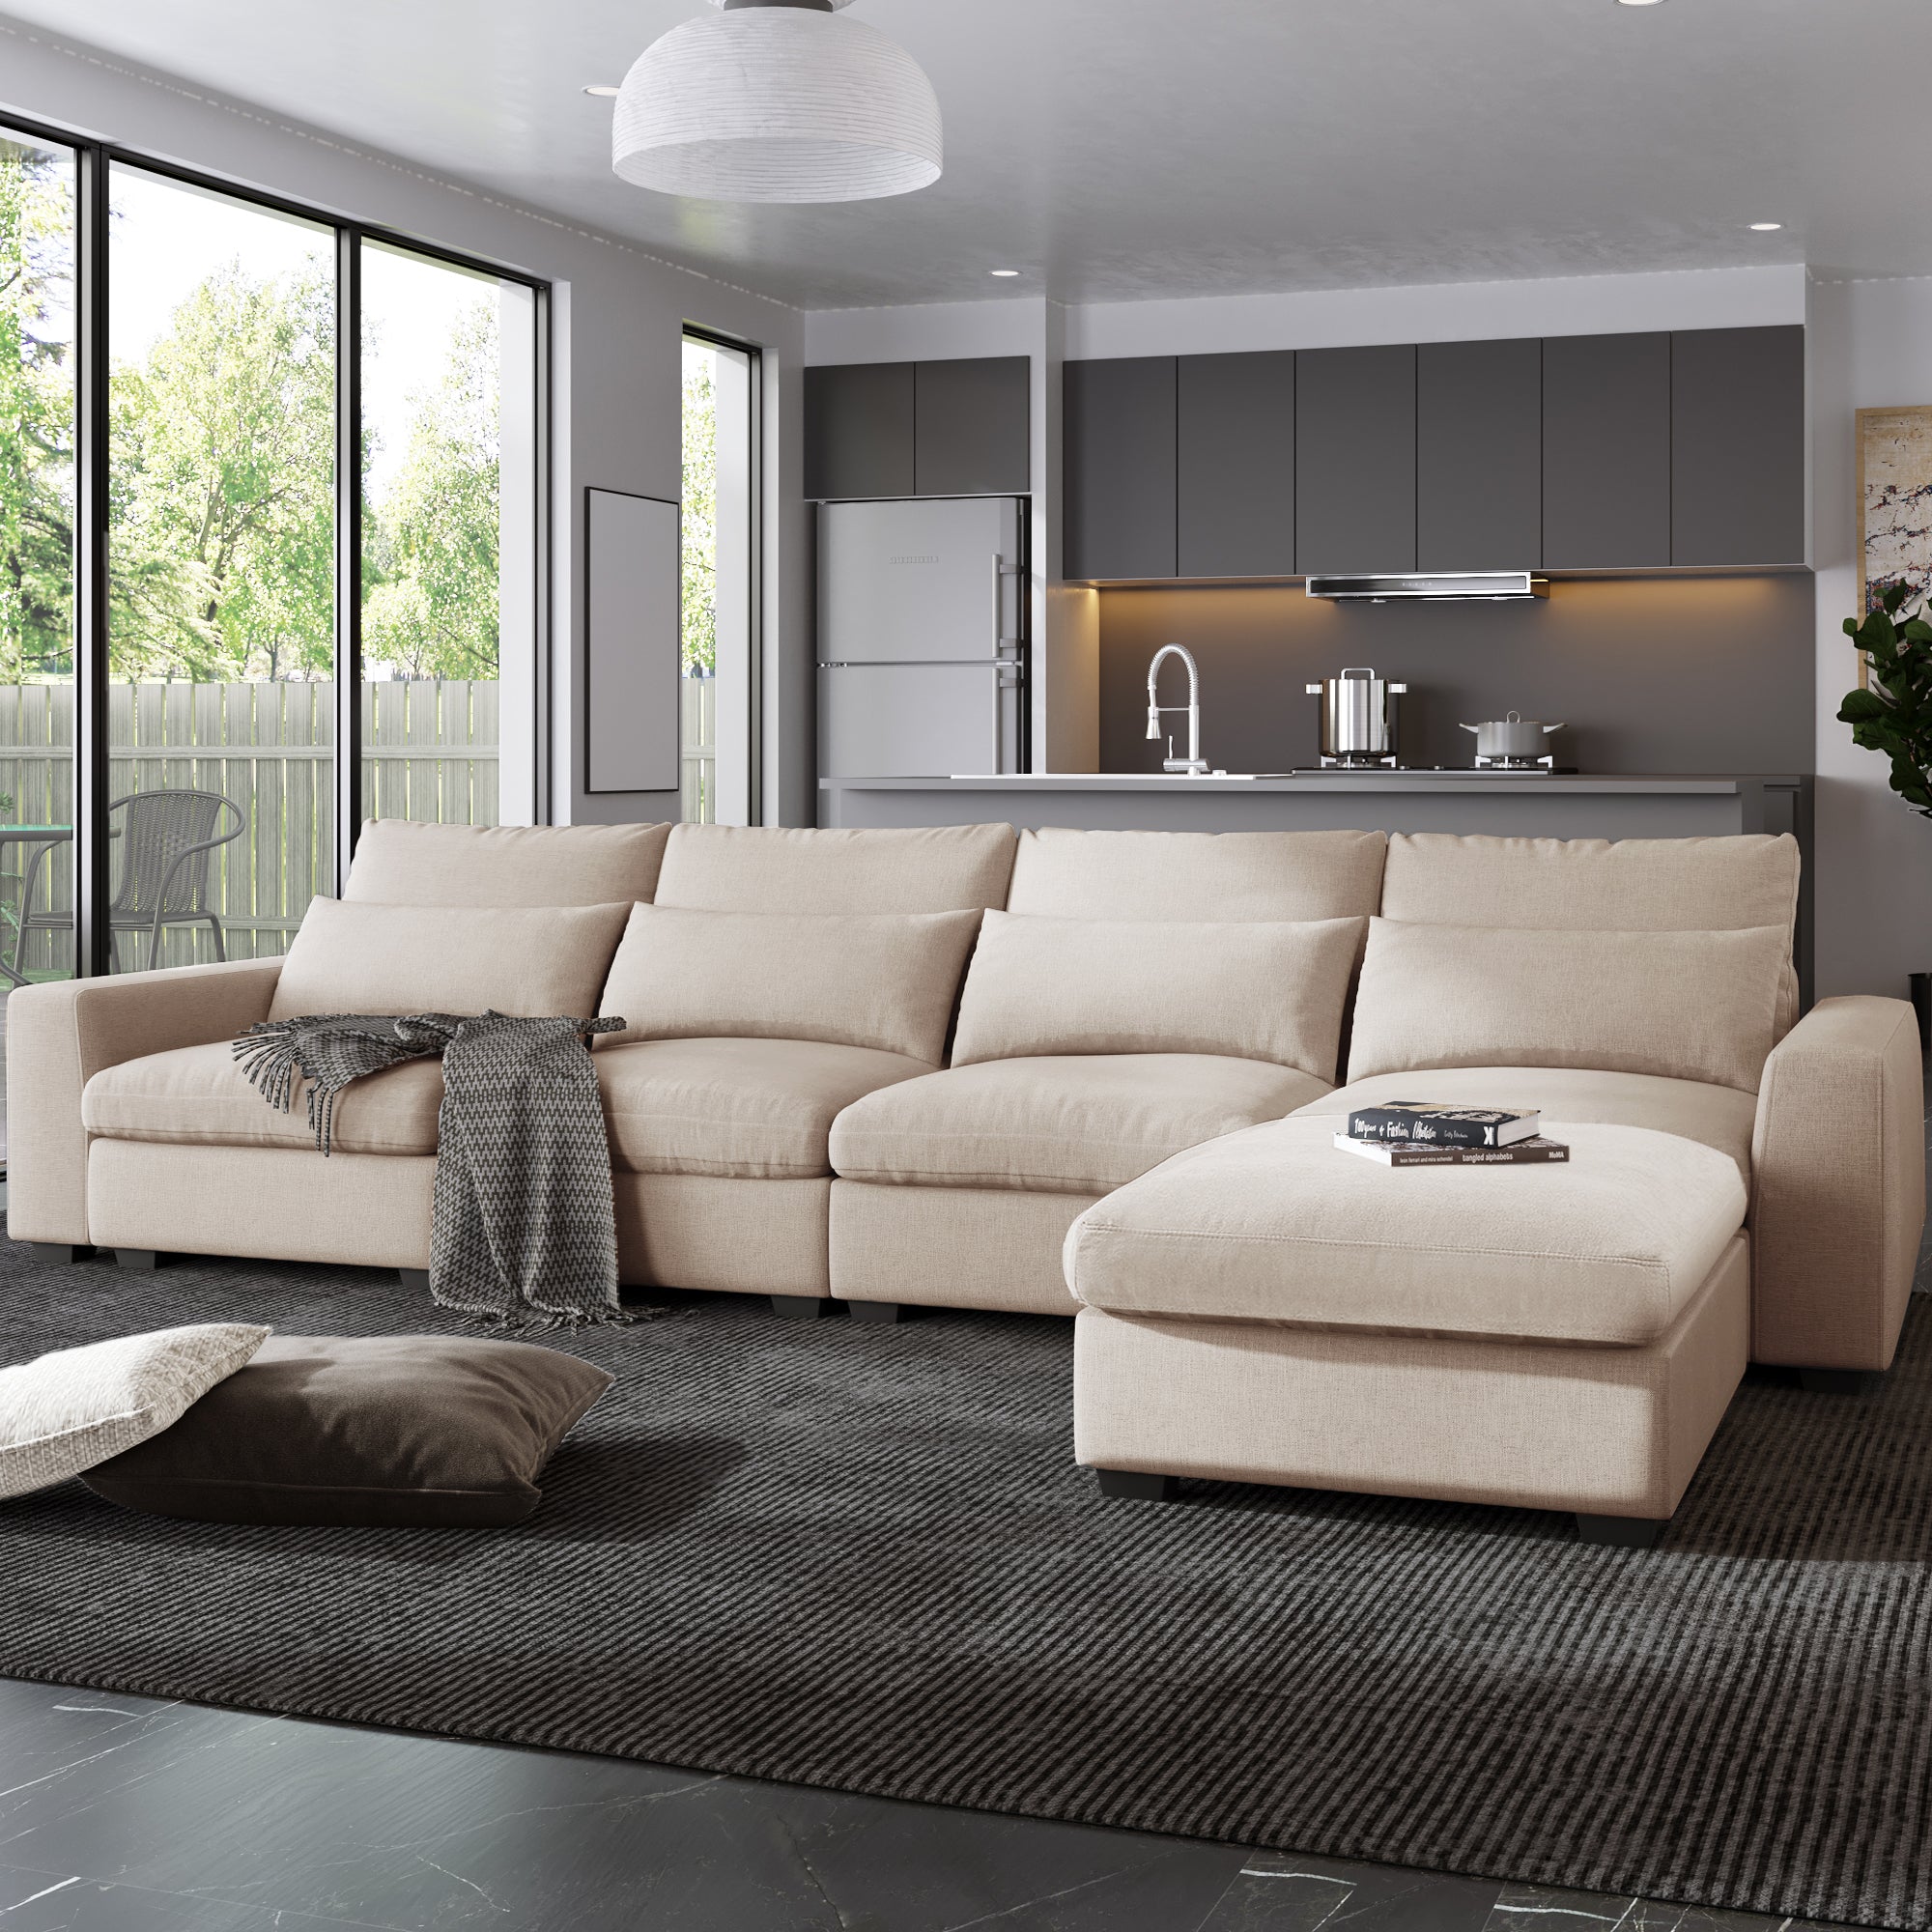 Modern L-Shape Feather Filled Sectional Sofa